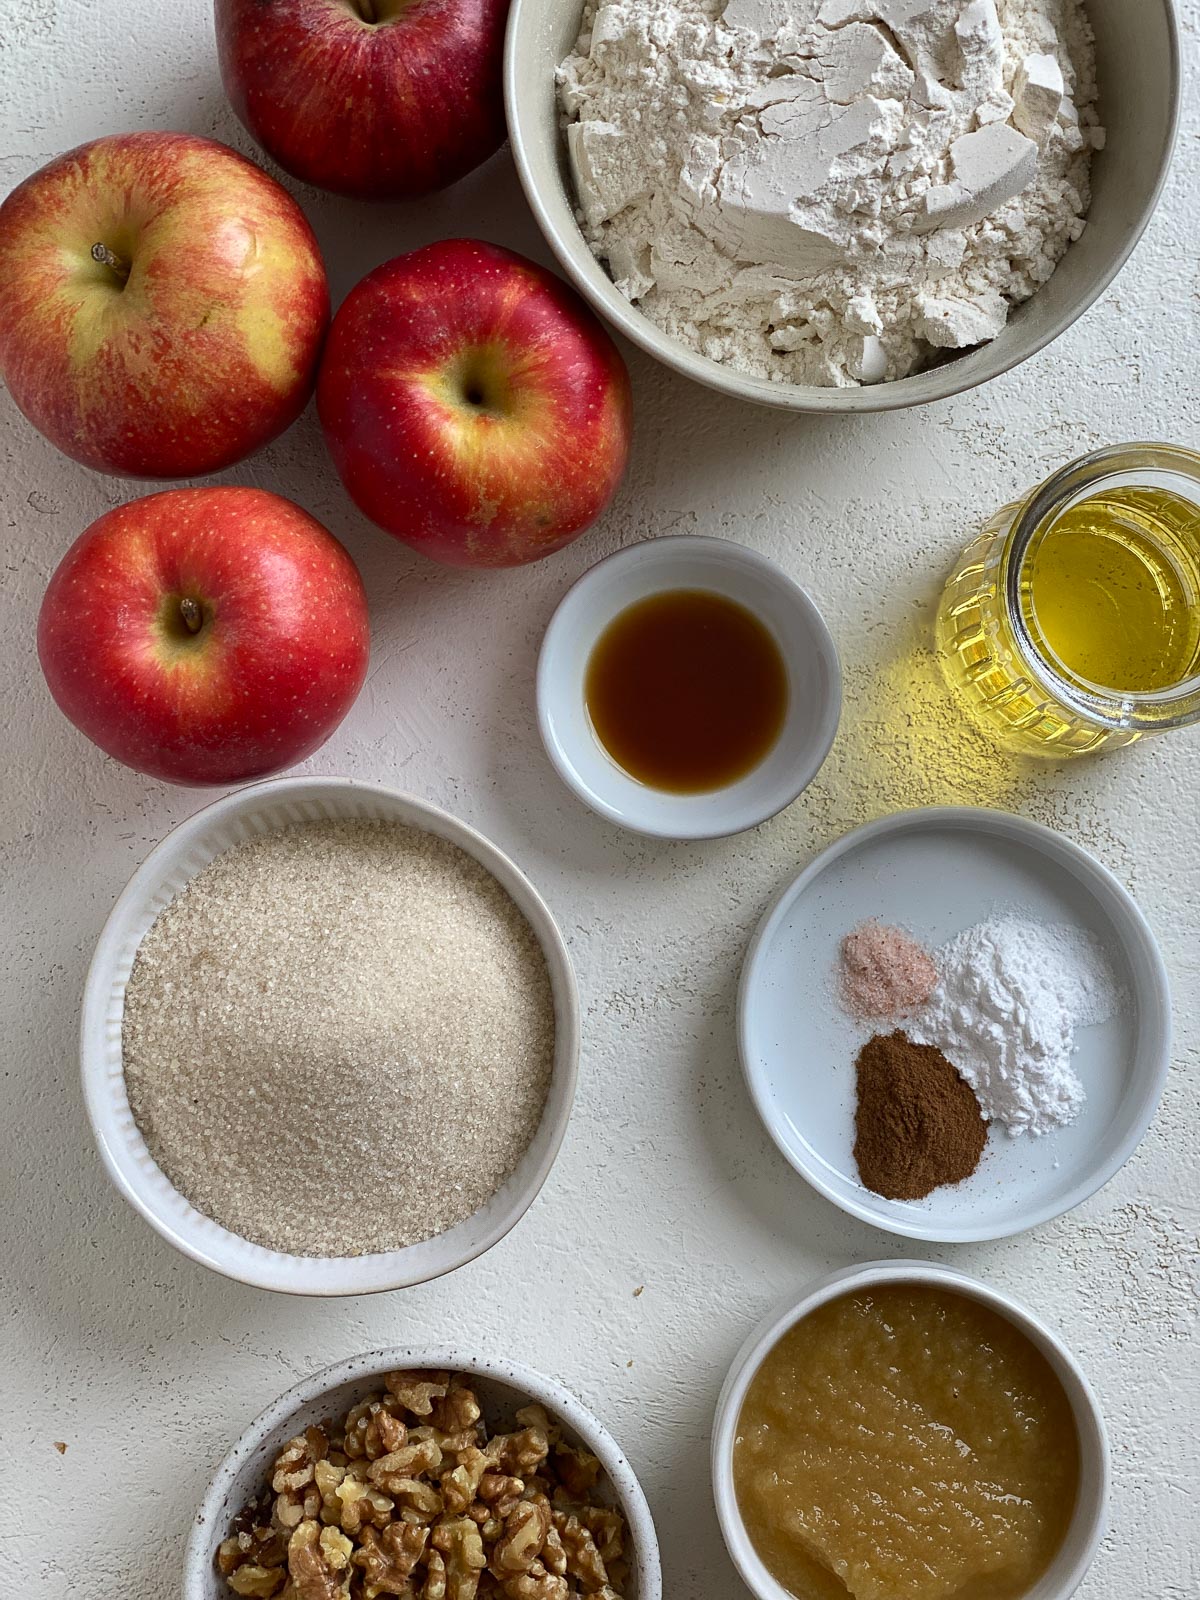 ingredients for Vegan Apple Muffins measured out against a white surface